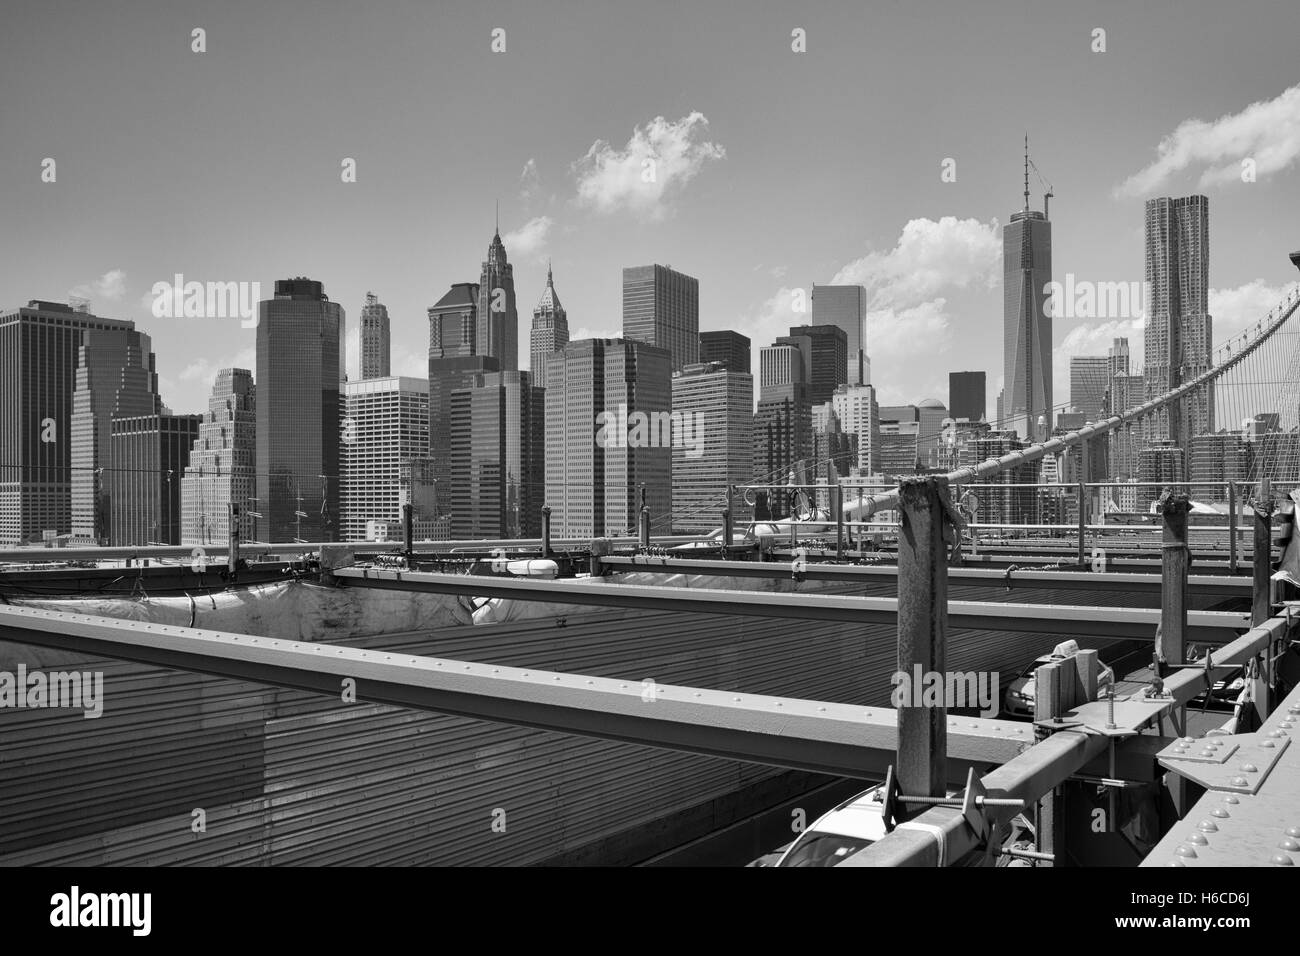 View from historic Brooklyn Bridge to  New York City, New York, USA. Black and White Image Stock Photo